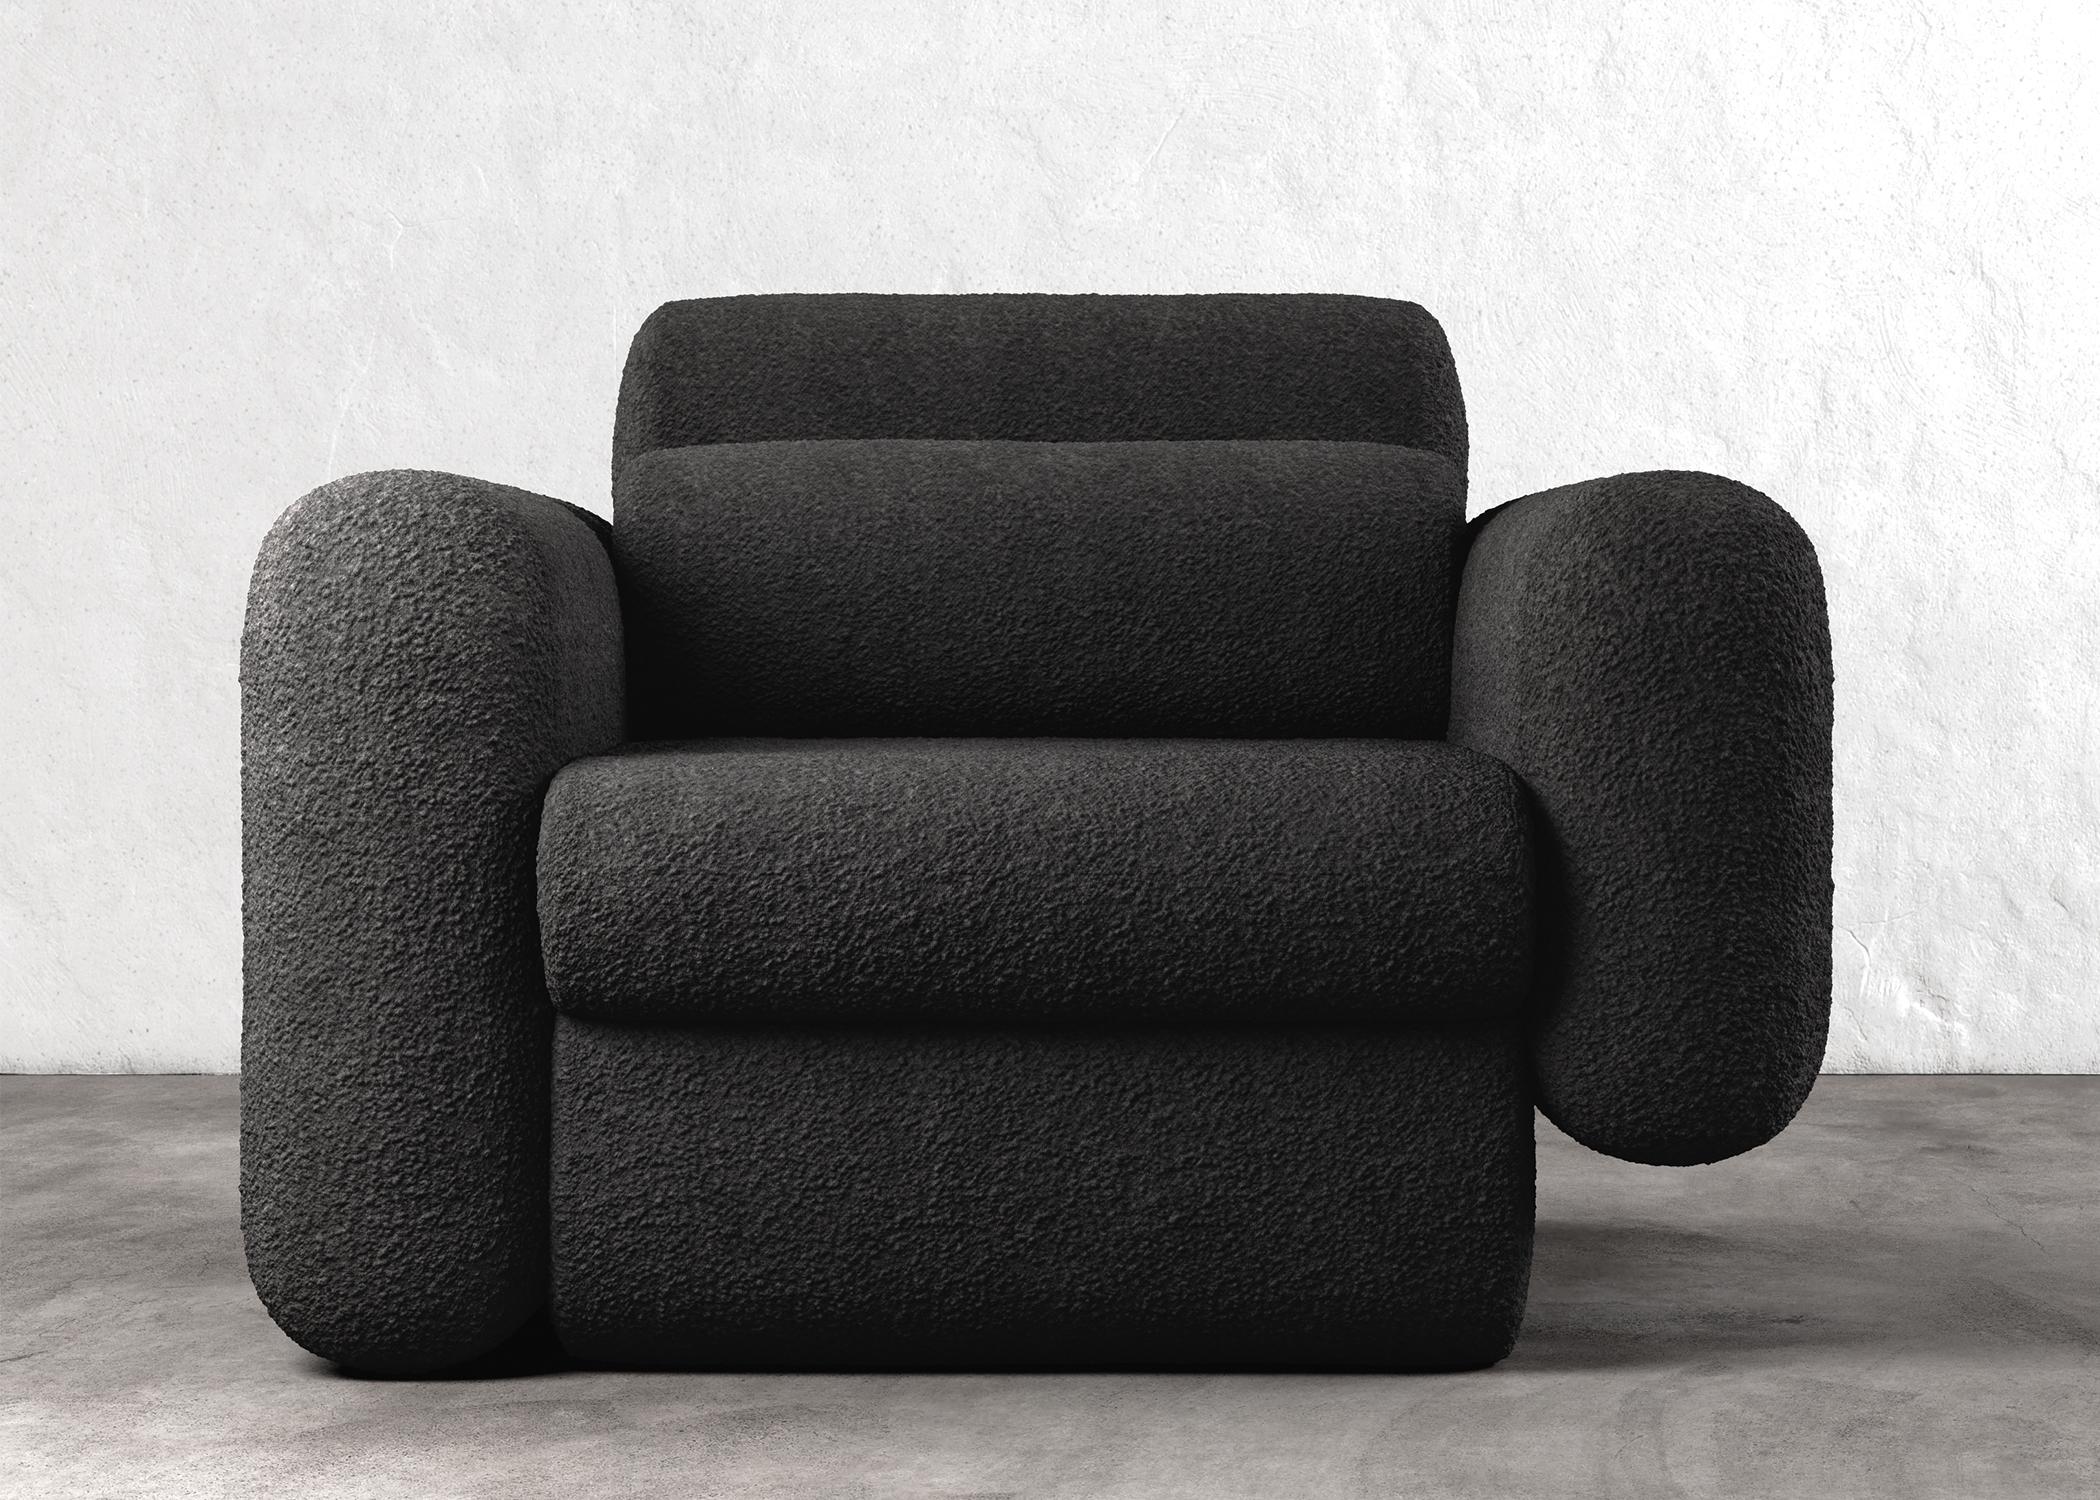 ASYM CHAIR - Modern Asymmetrical Sectional Chair in Black Boucle

The Asym chair is a stunning piece of furniture that features asymmetrical design elements that create a unique and modern aesthetic. The tension between the unbalanced elements of